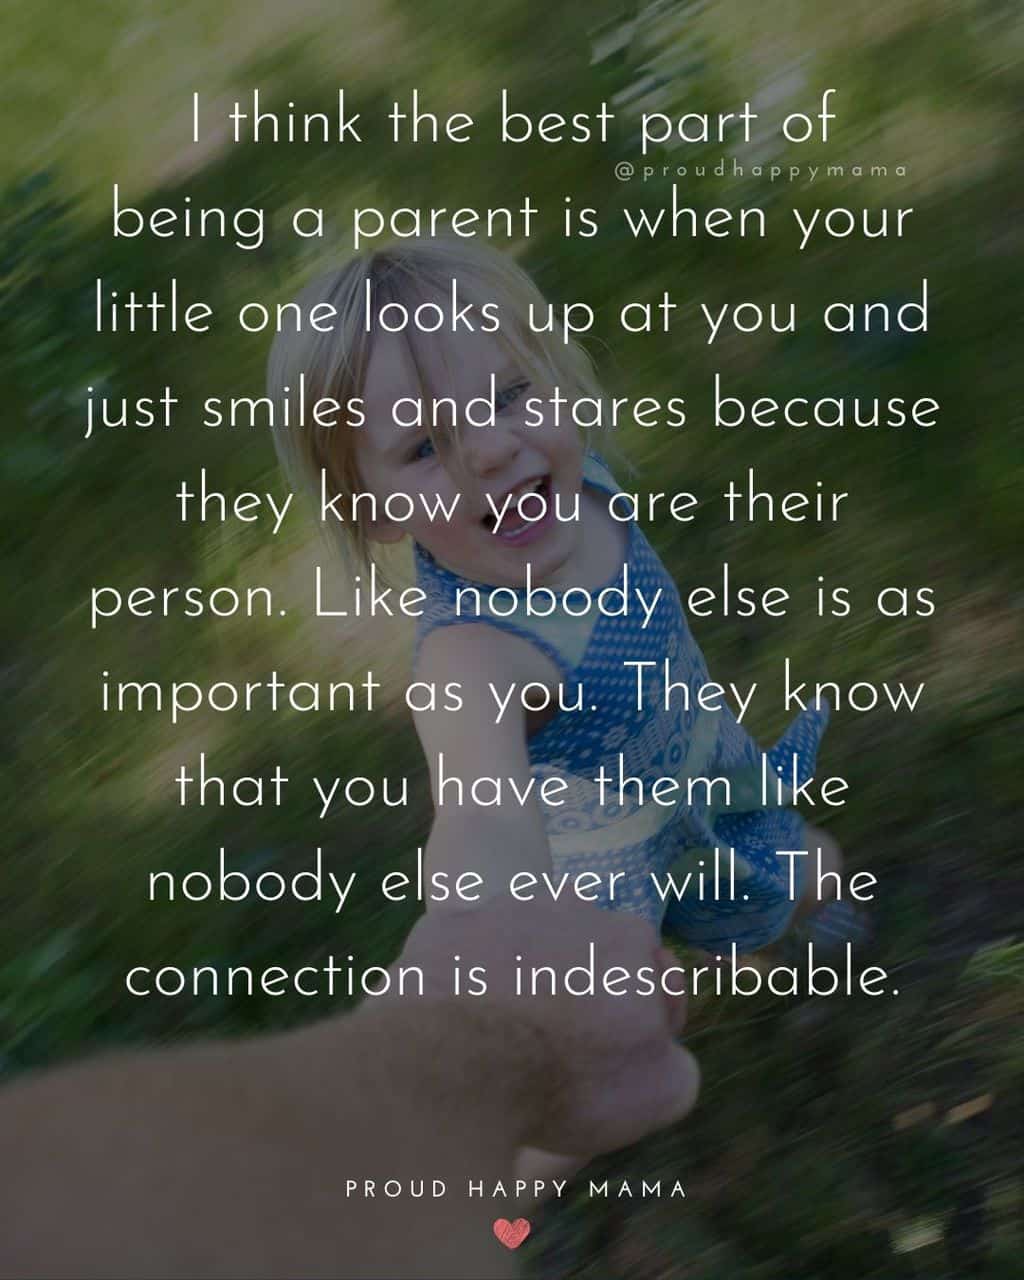 Parenting Quotes - I think the best part of being a parent is when your little one looks up at you and just smiles and stares because they know